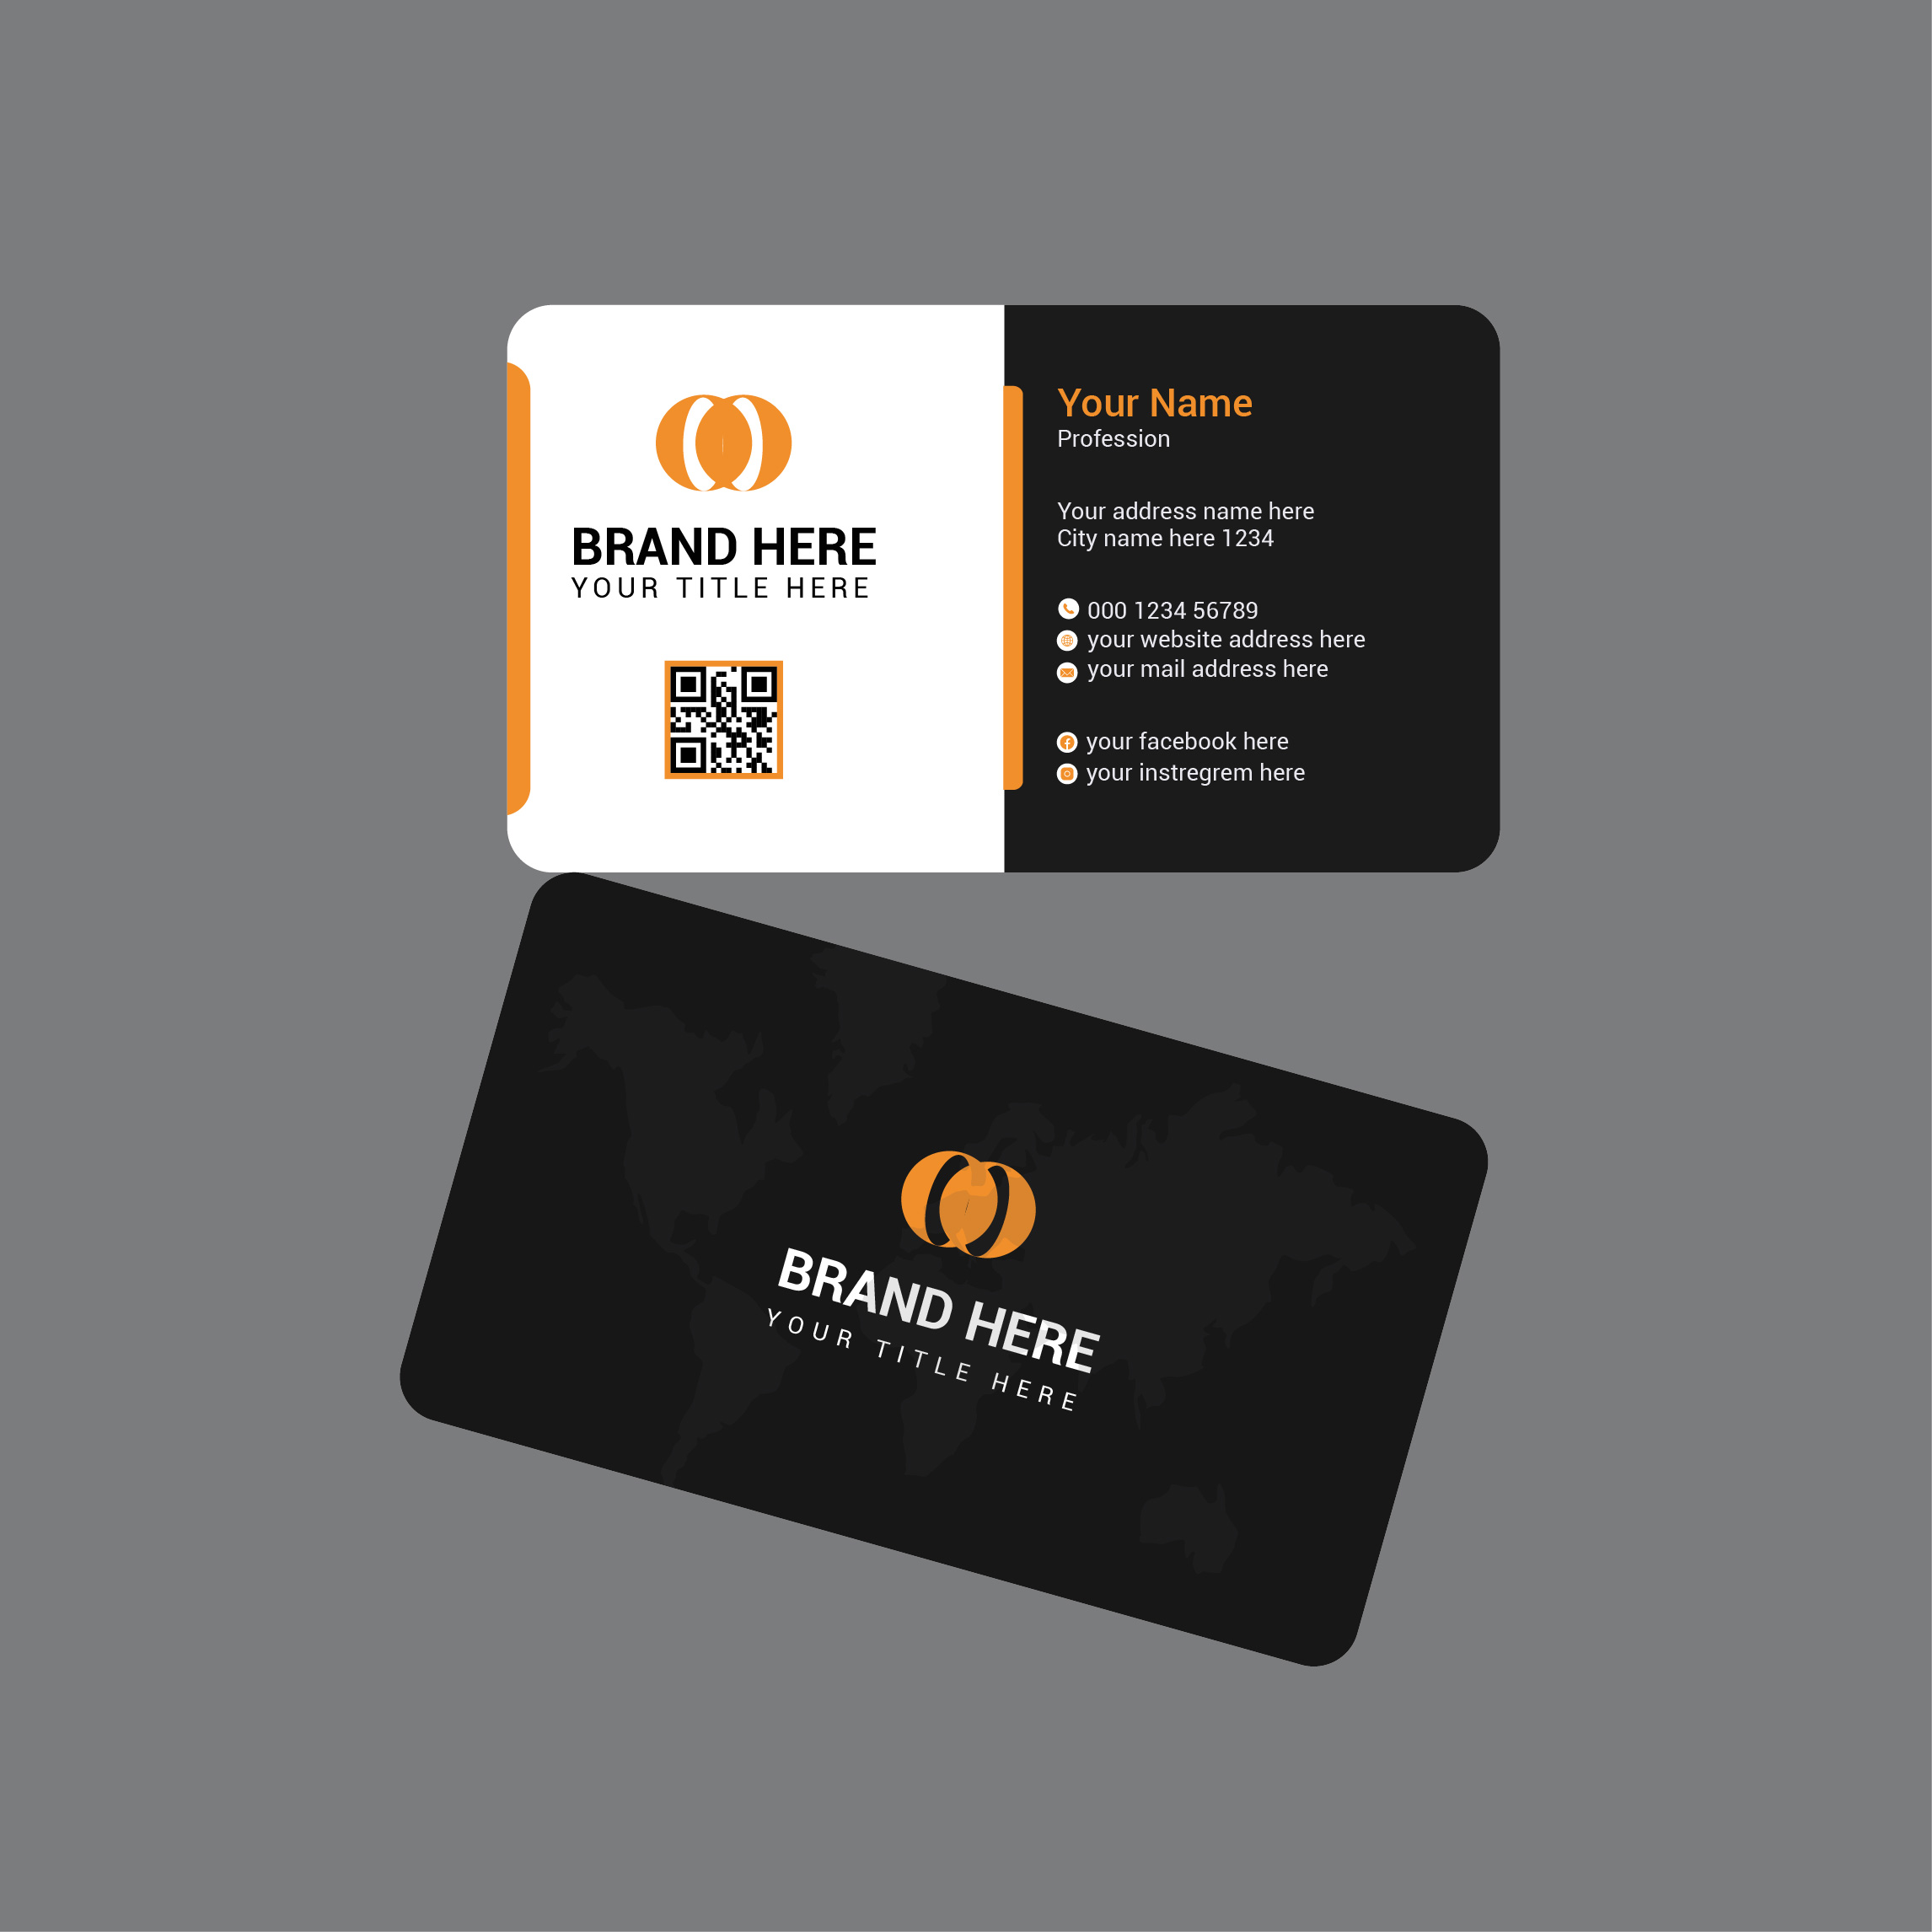 Black and white business card with orange accents.